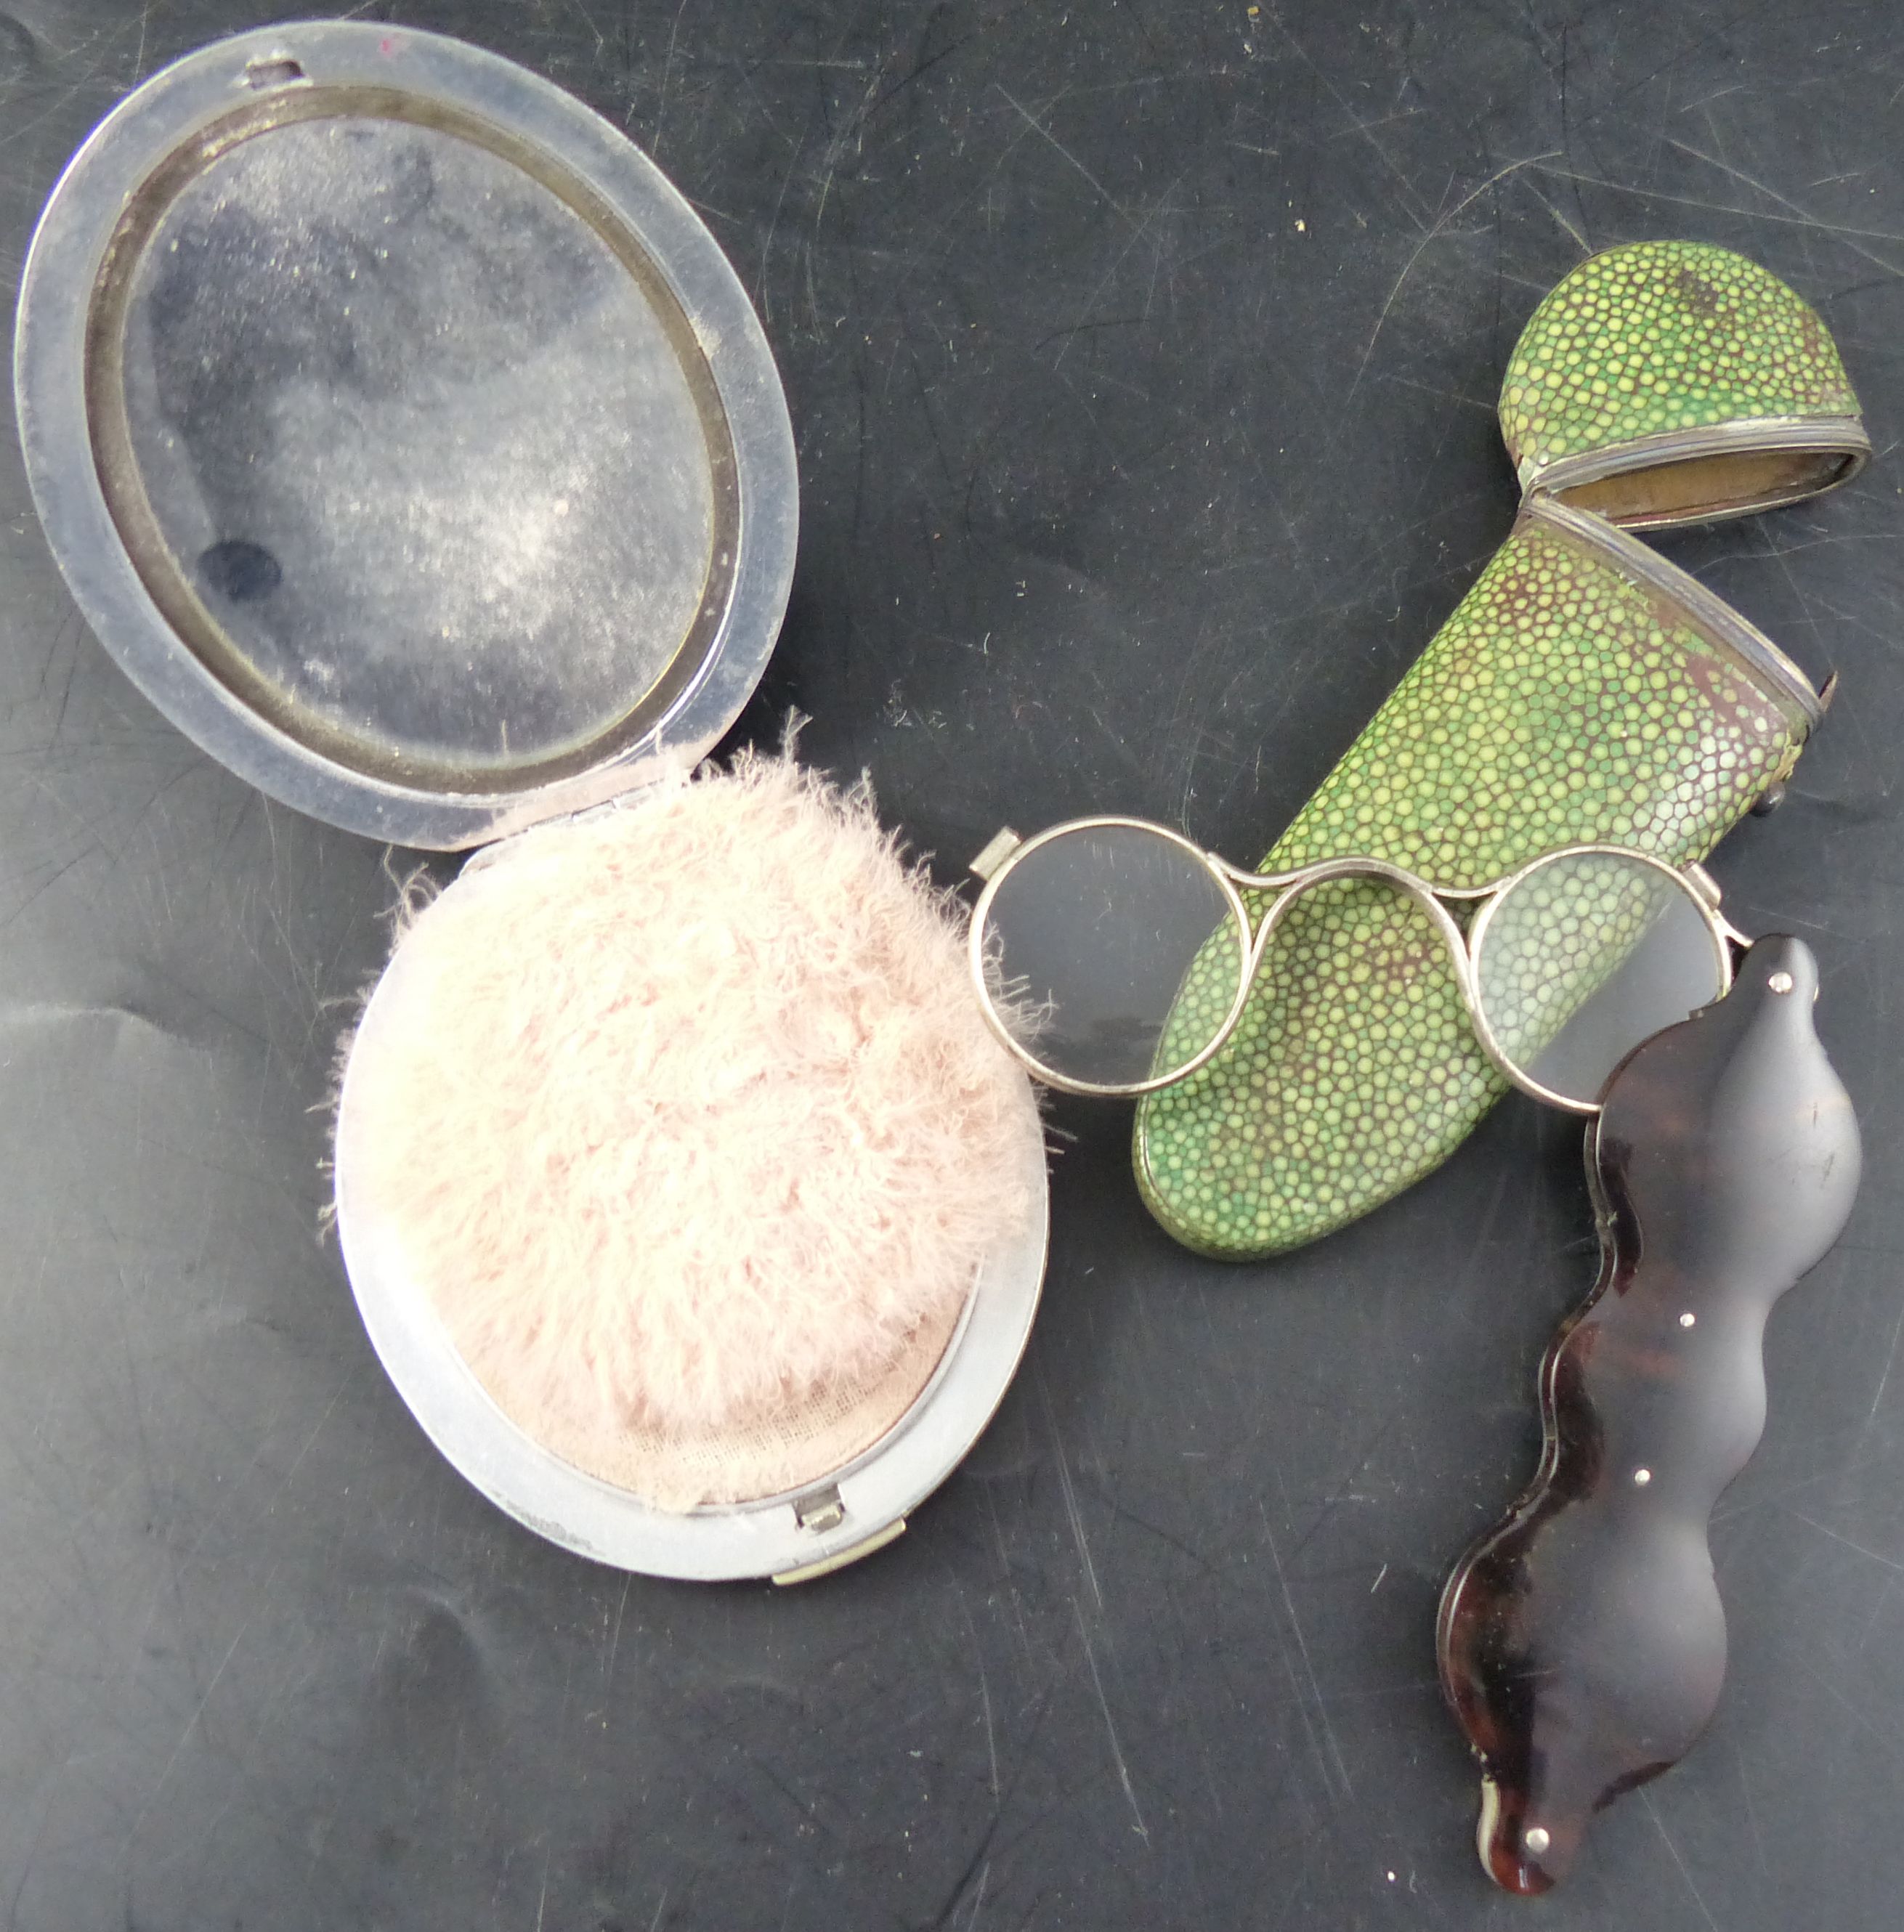 A pair of early 19th century silver and tortoiseshell lorgnette spectacles, and a compact